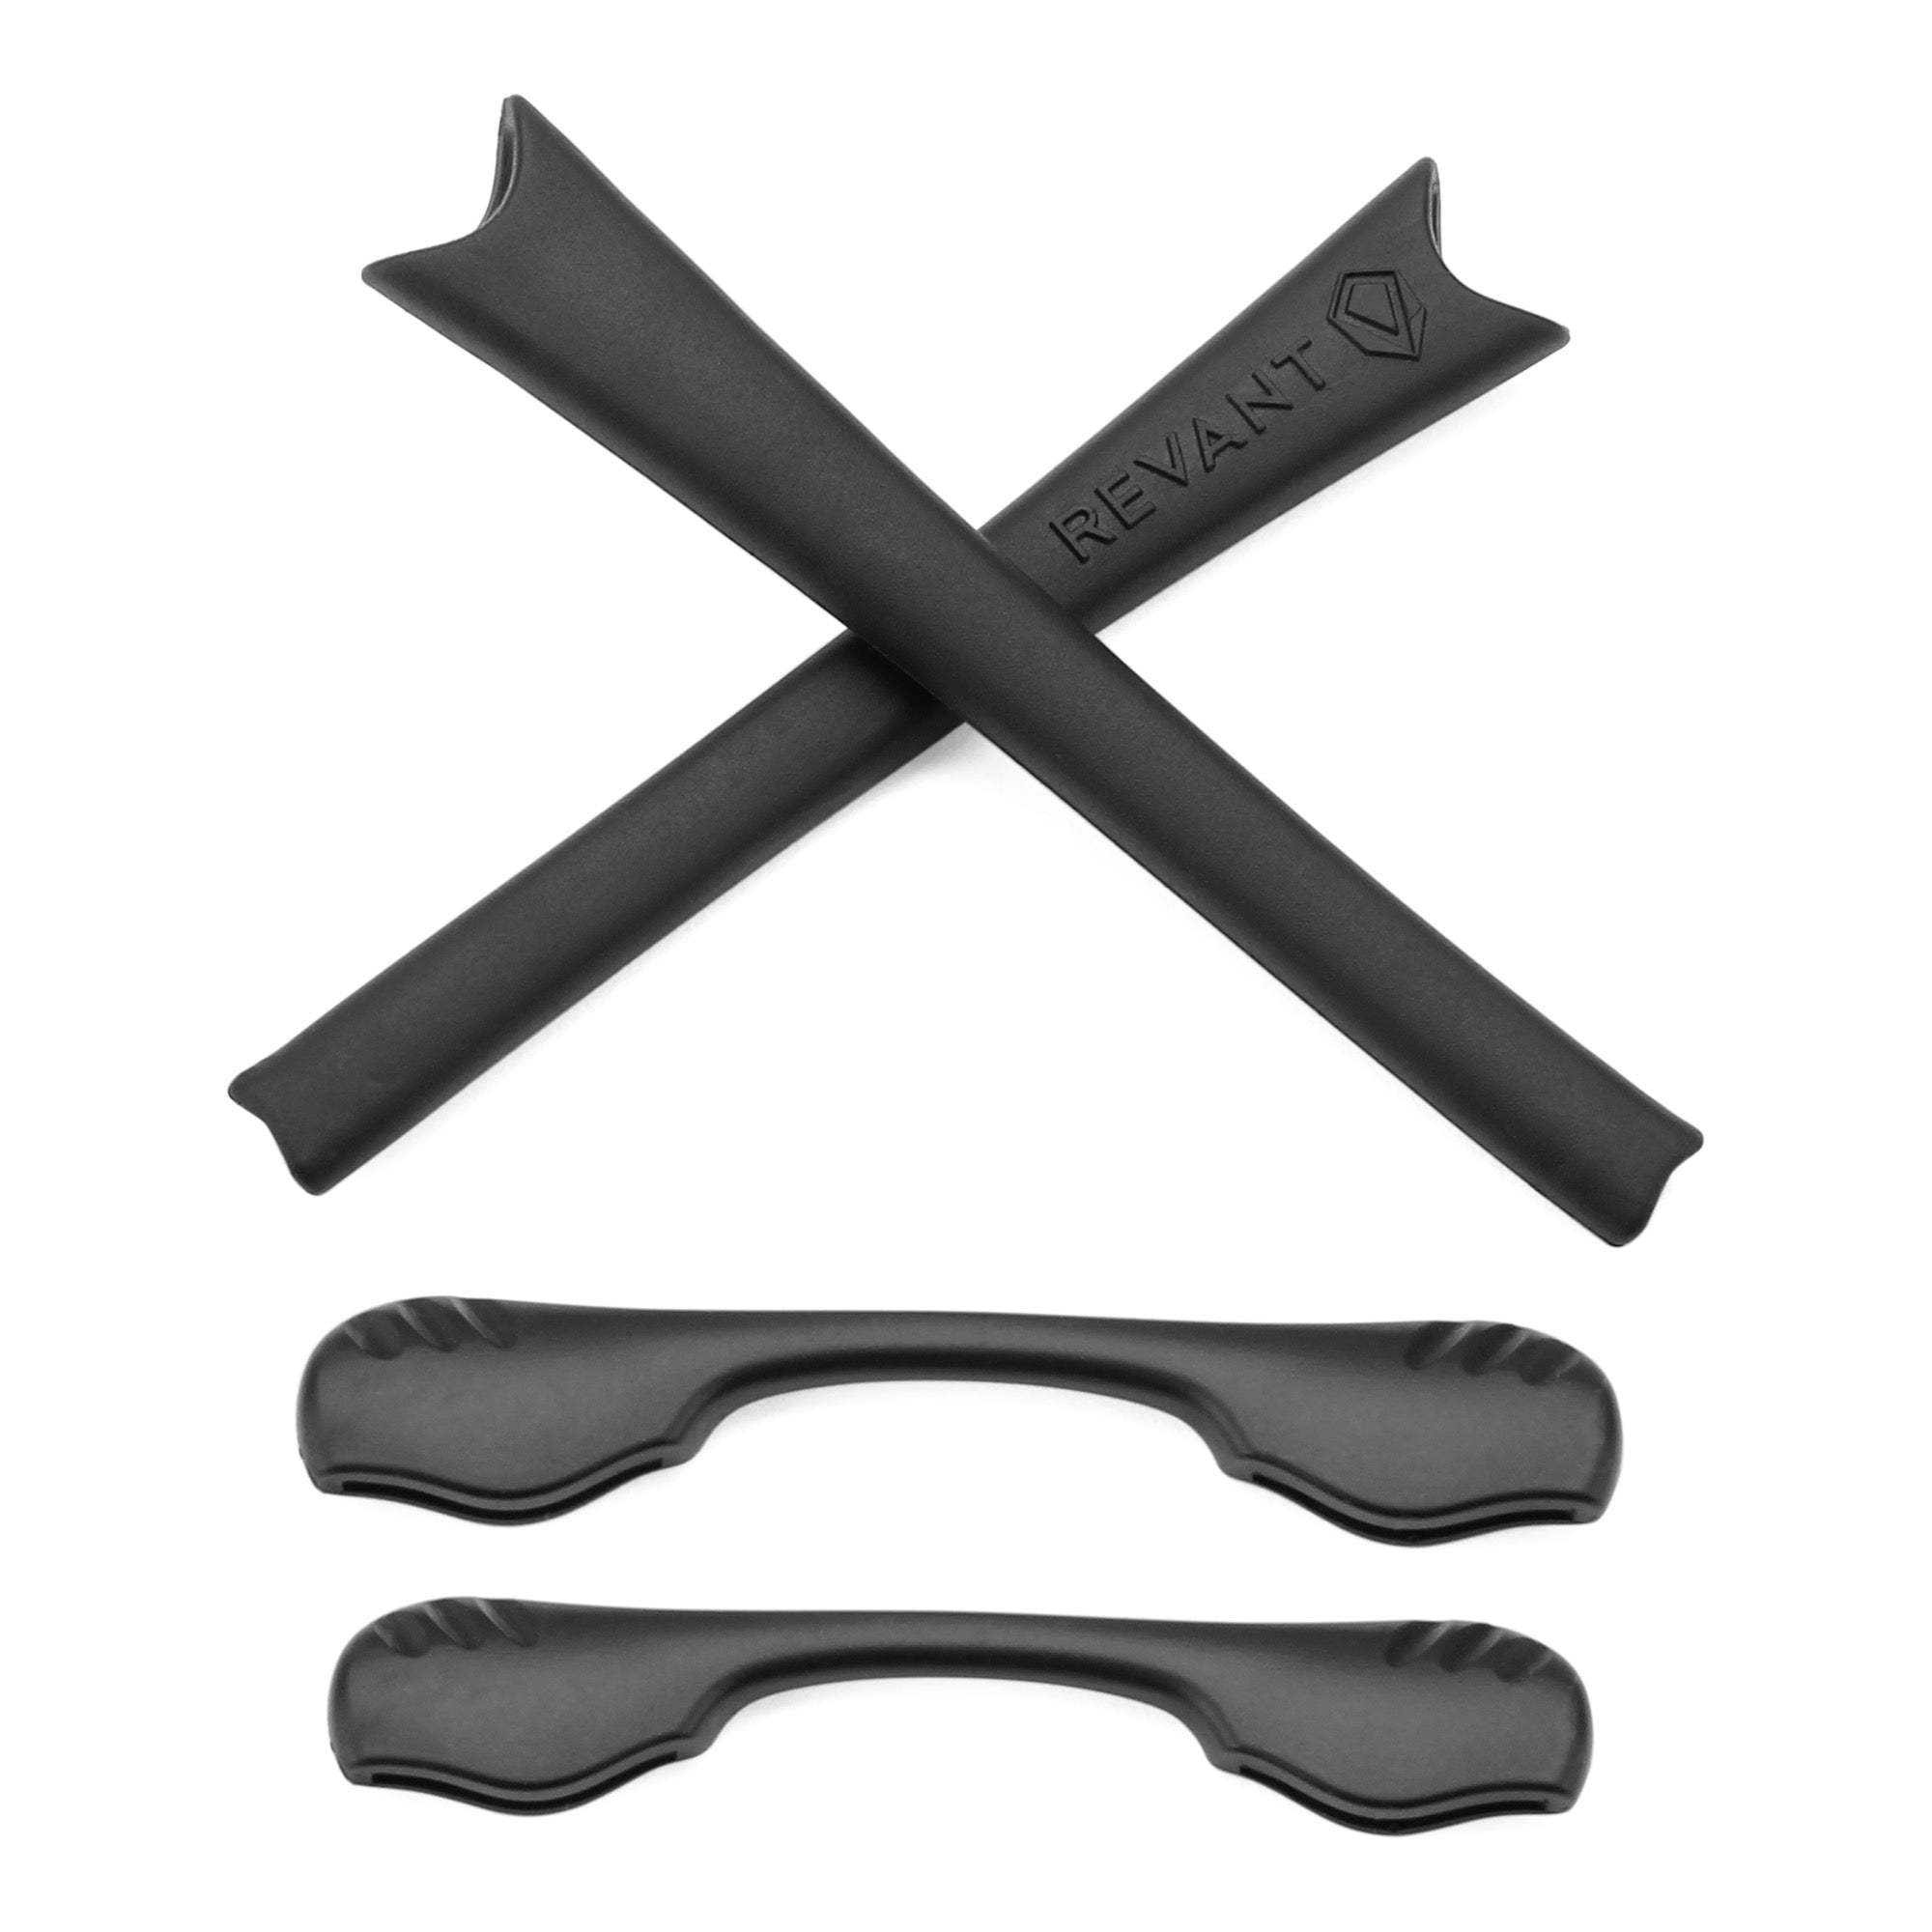 Black rubber temple and nose pieces for Oakley Radar sunglasses